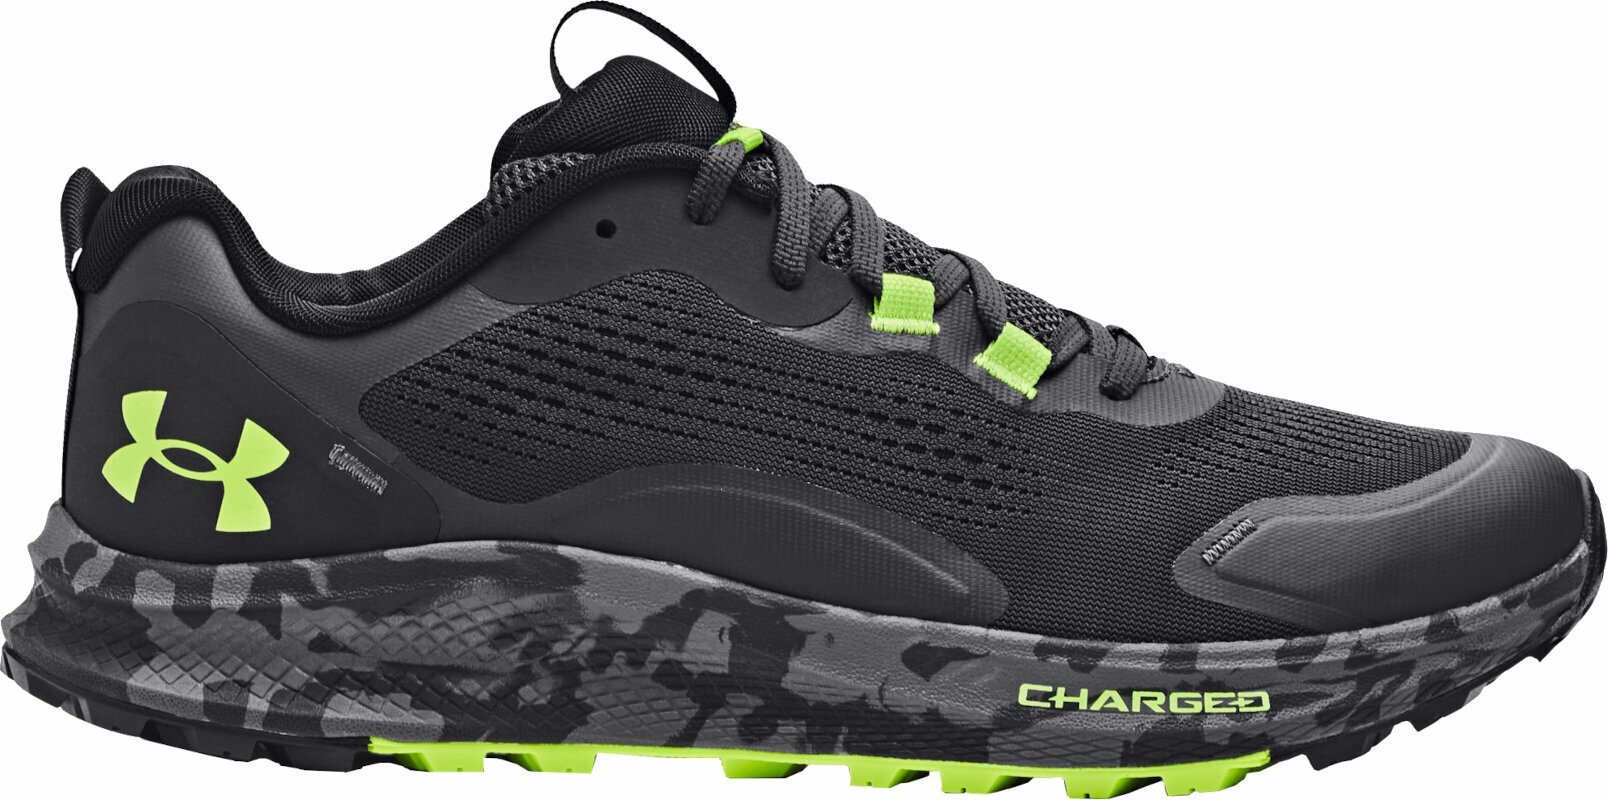 Under Armour Men's UA Charged Bandit Trail 2 Running Shoes Jet Gray/Black/Lime Surge 42